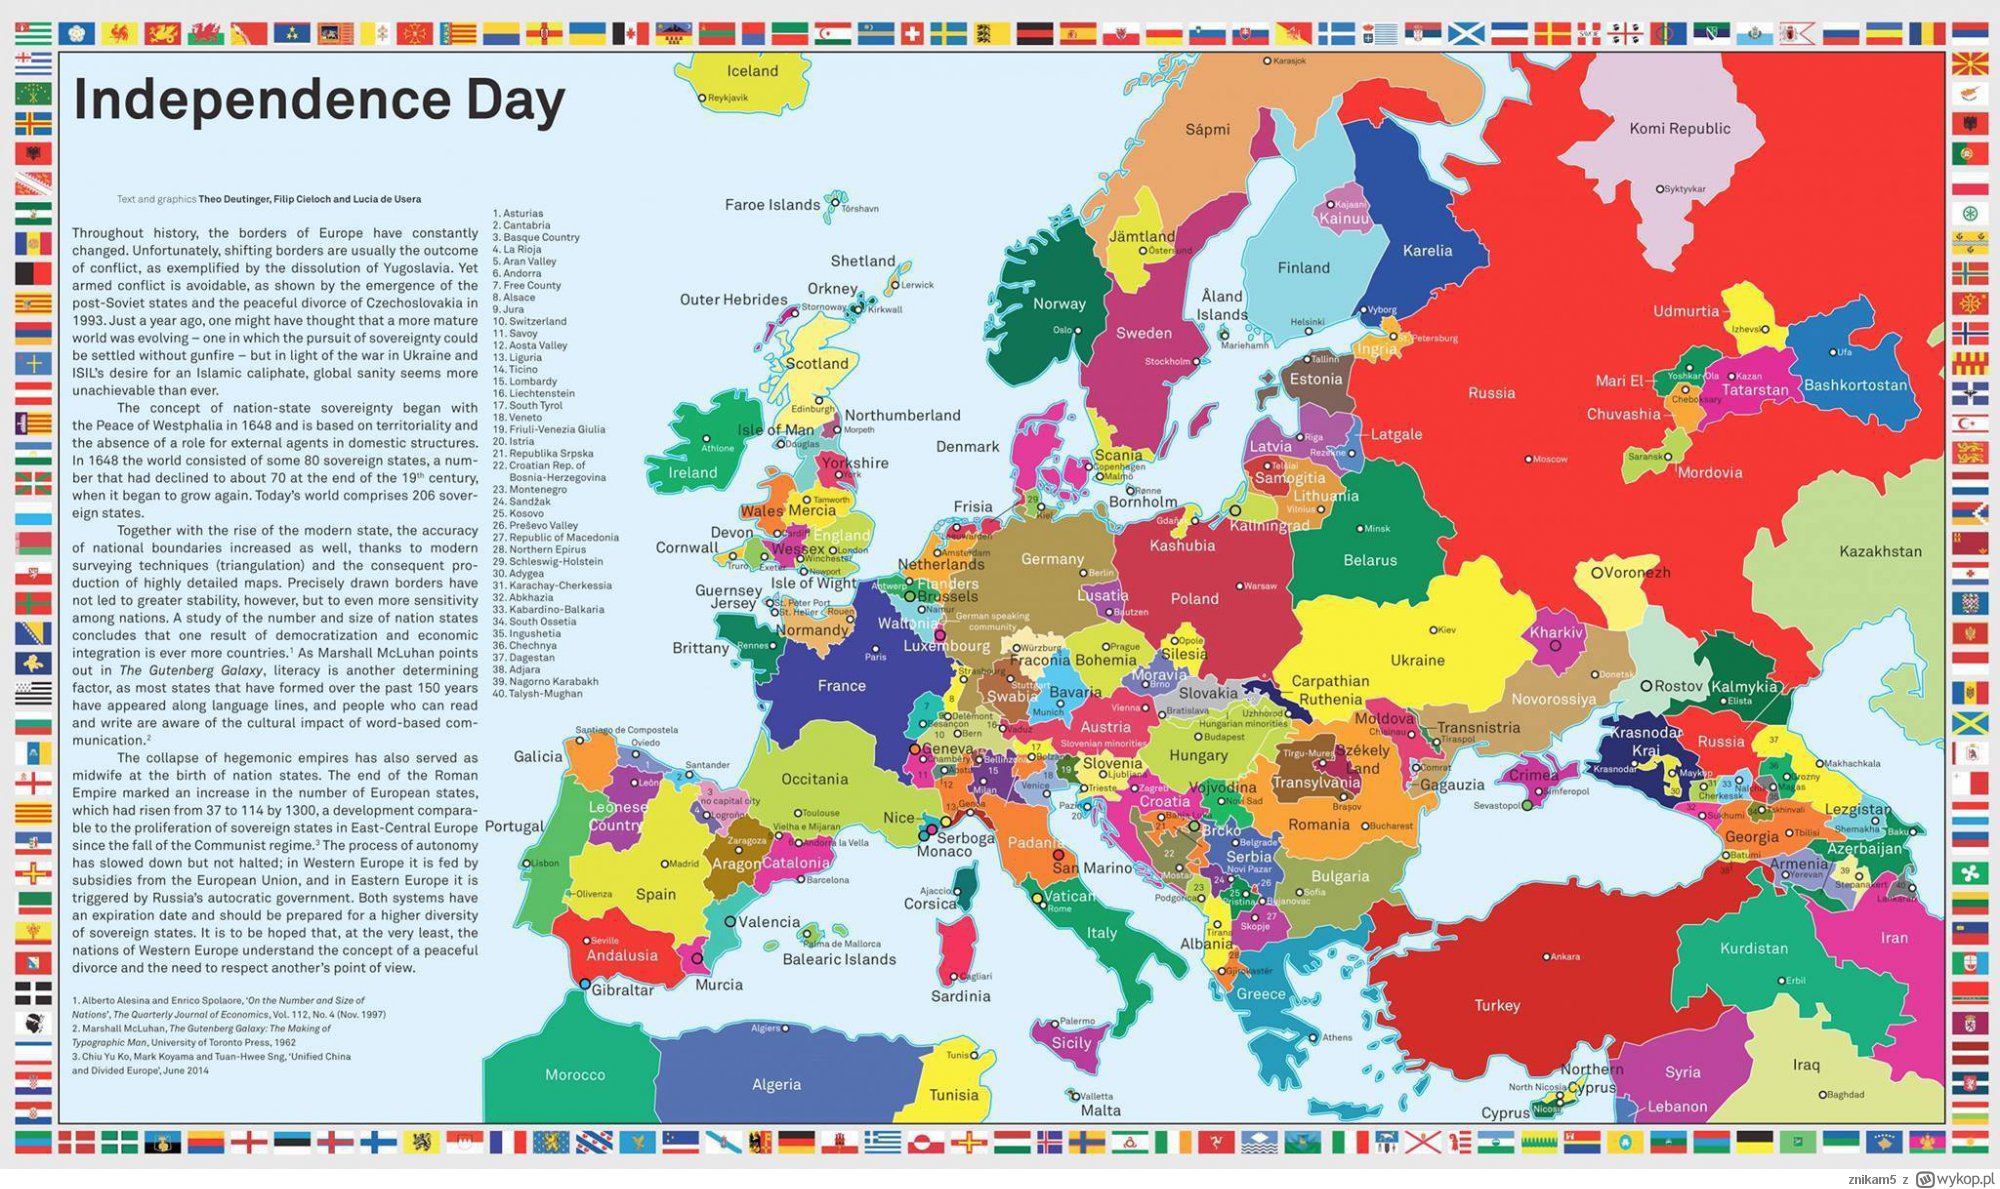 If Europe's map was based on ethnic nations instead of conquest it would look like this.